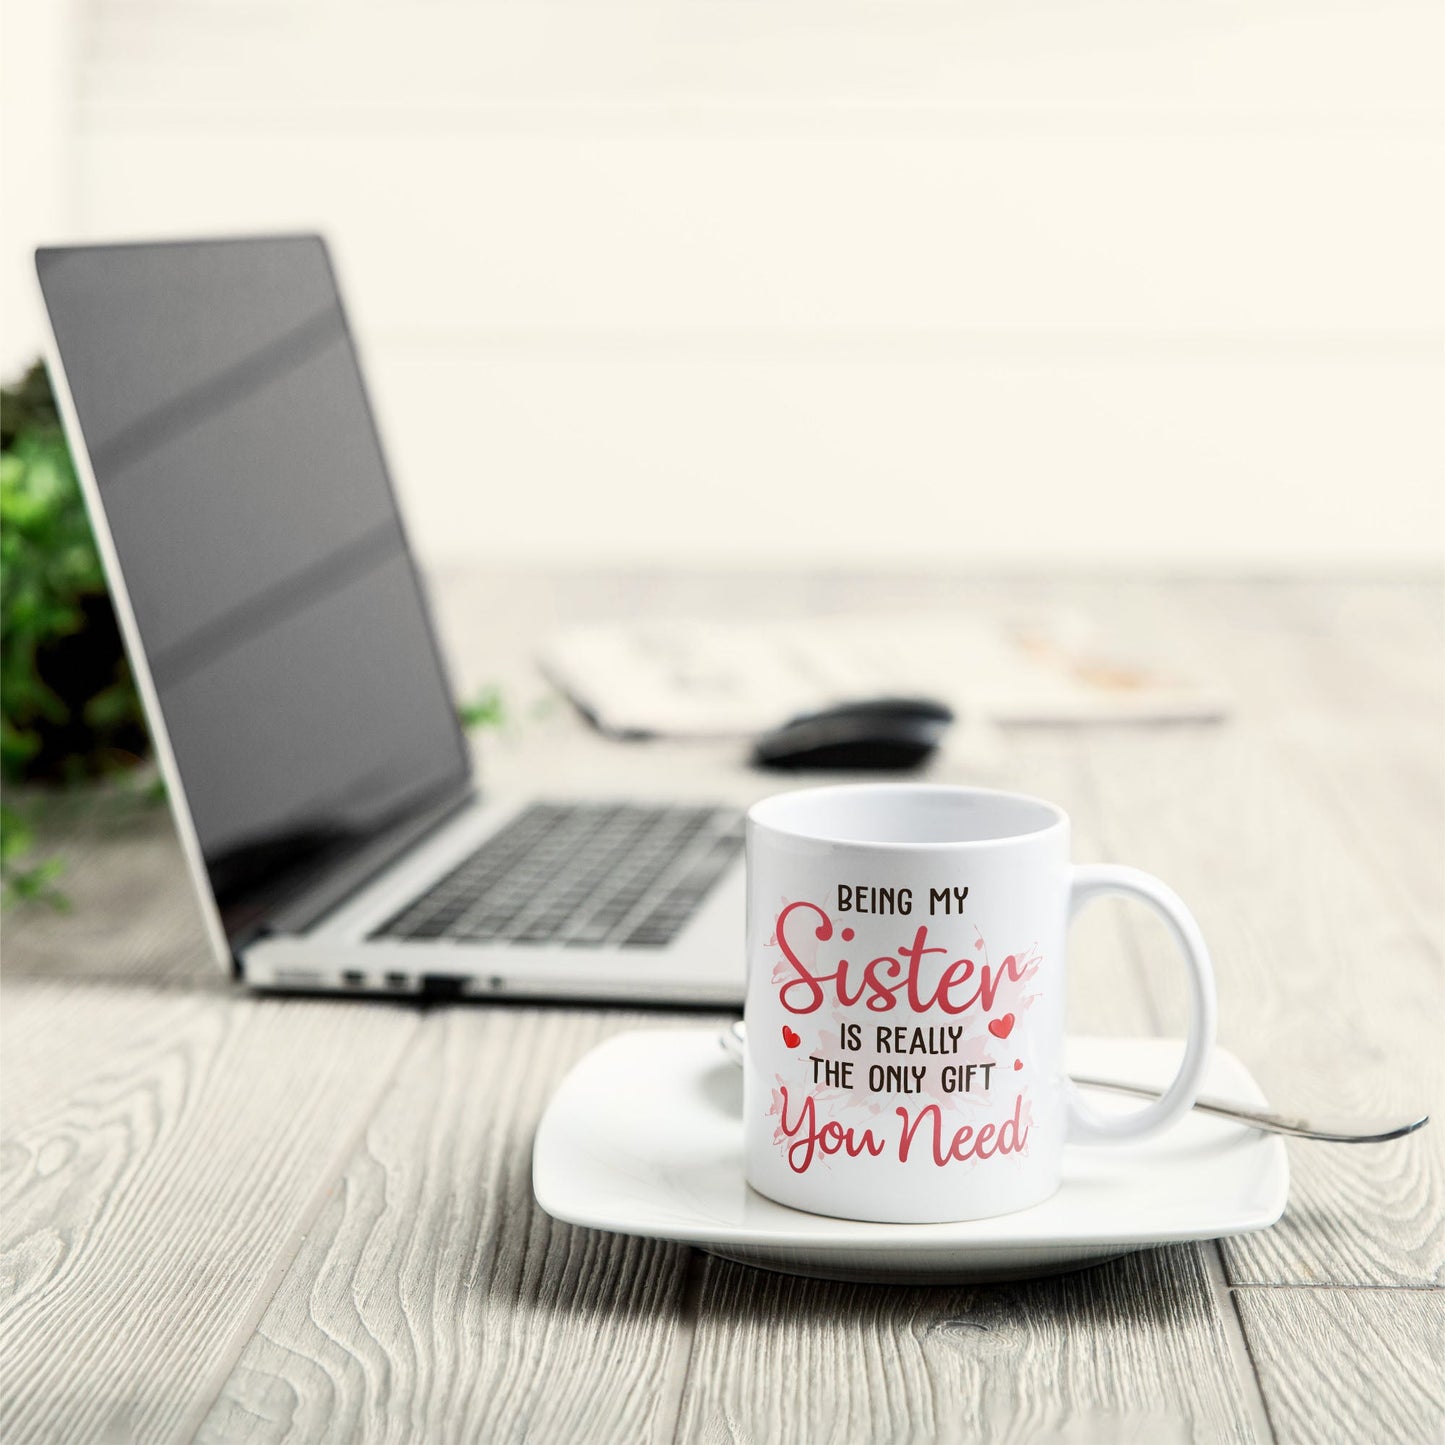 Being My Sister Is The Only Gift You Need - Personalized Mug